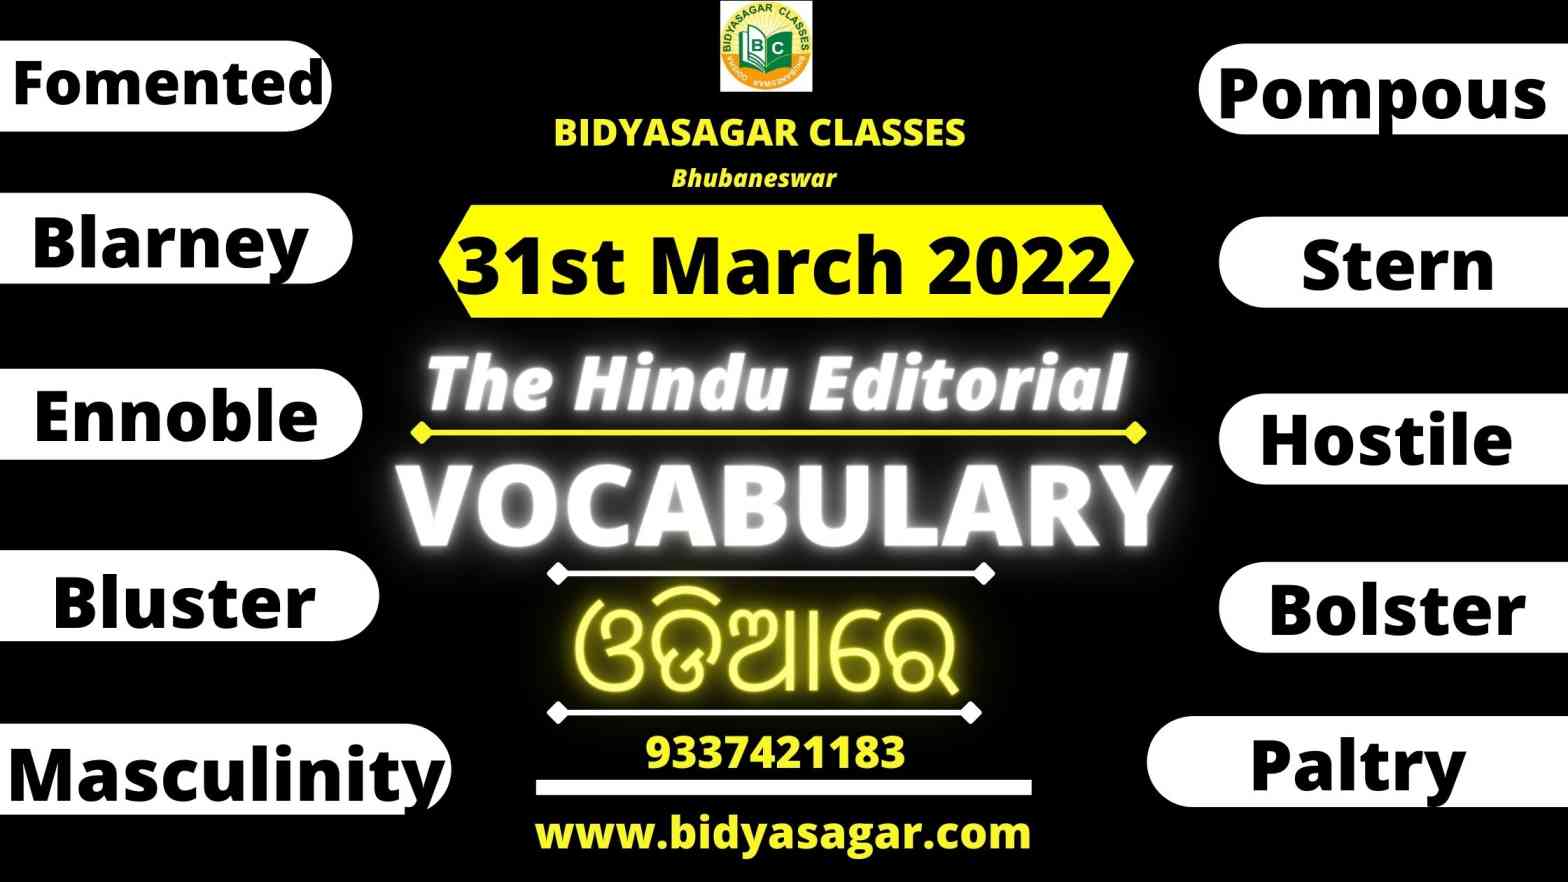 The Hindu Editorial Vocabulary of 31st March 2022